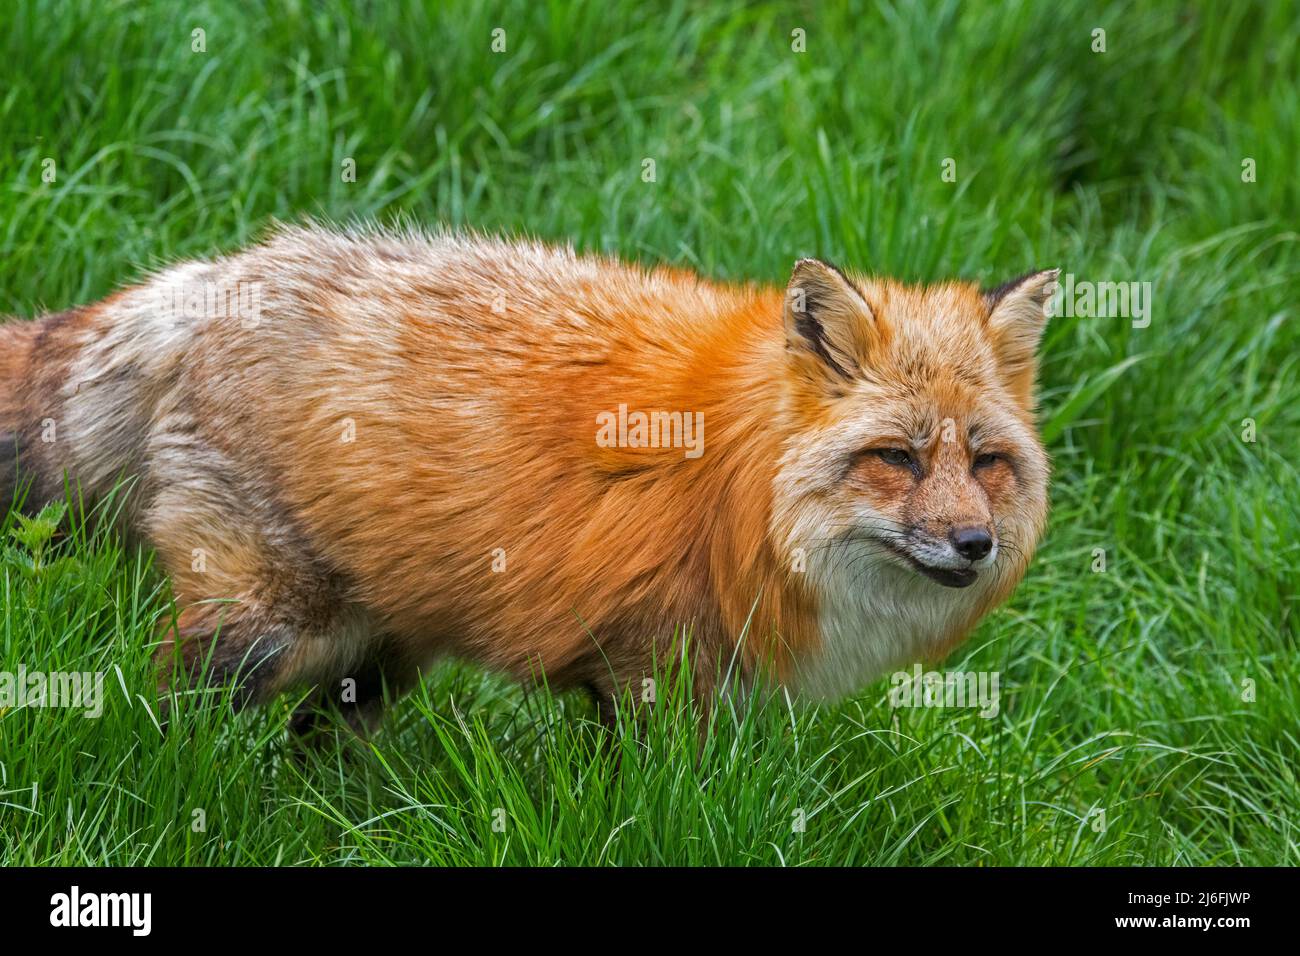 Red fox (Vulpes vulpes) in thick winter coat / fur hunting mice, voles and insects in long grass in field / grassland / meadow in spring Stock Photo